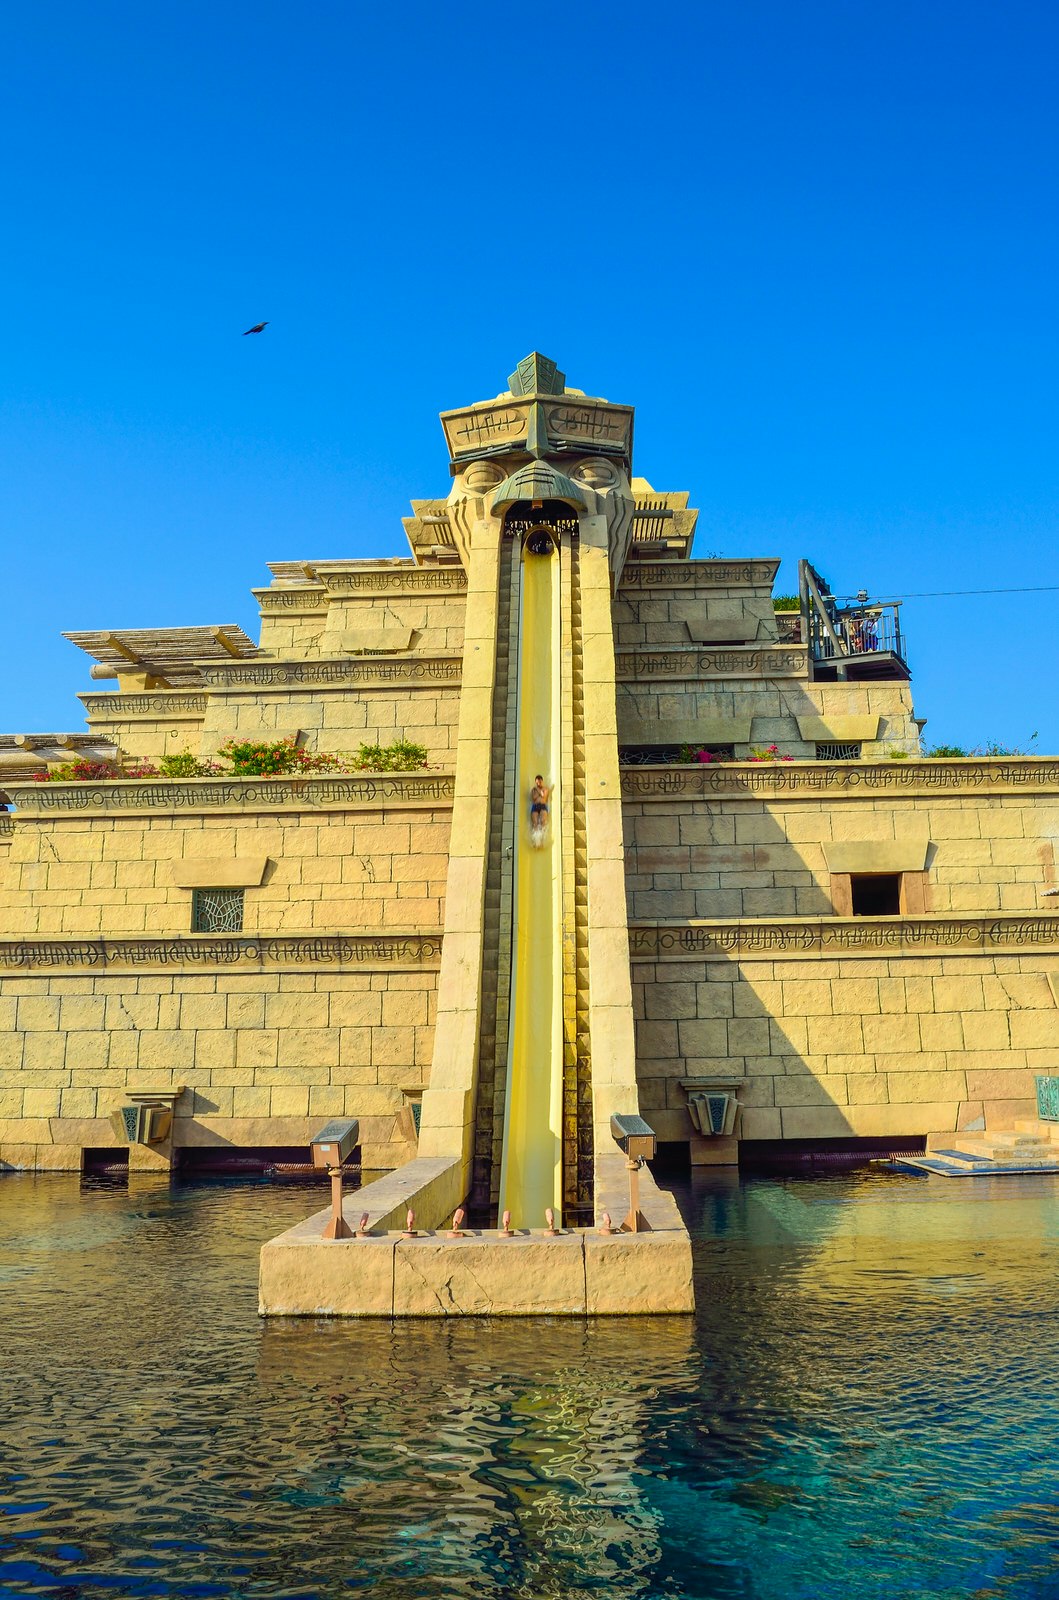 The Leap of Faith is the tallest and scariest water slide in Aquaventure Waterpark at Atlantis. Image by PitK / Shutterstock